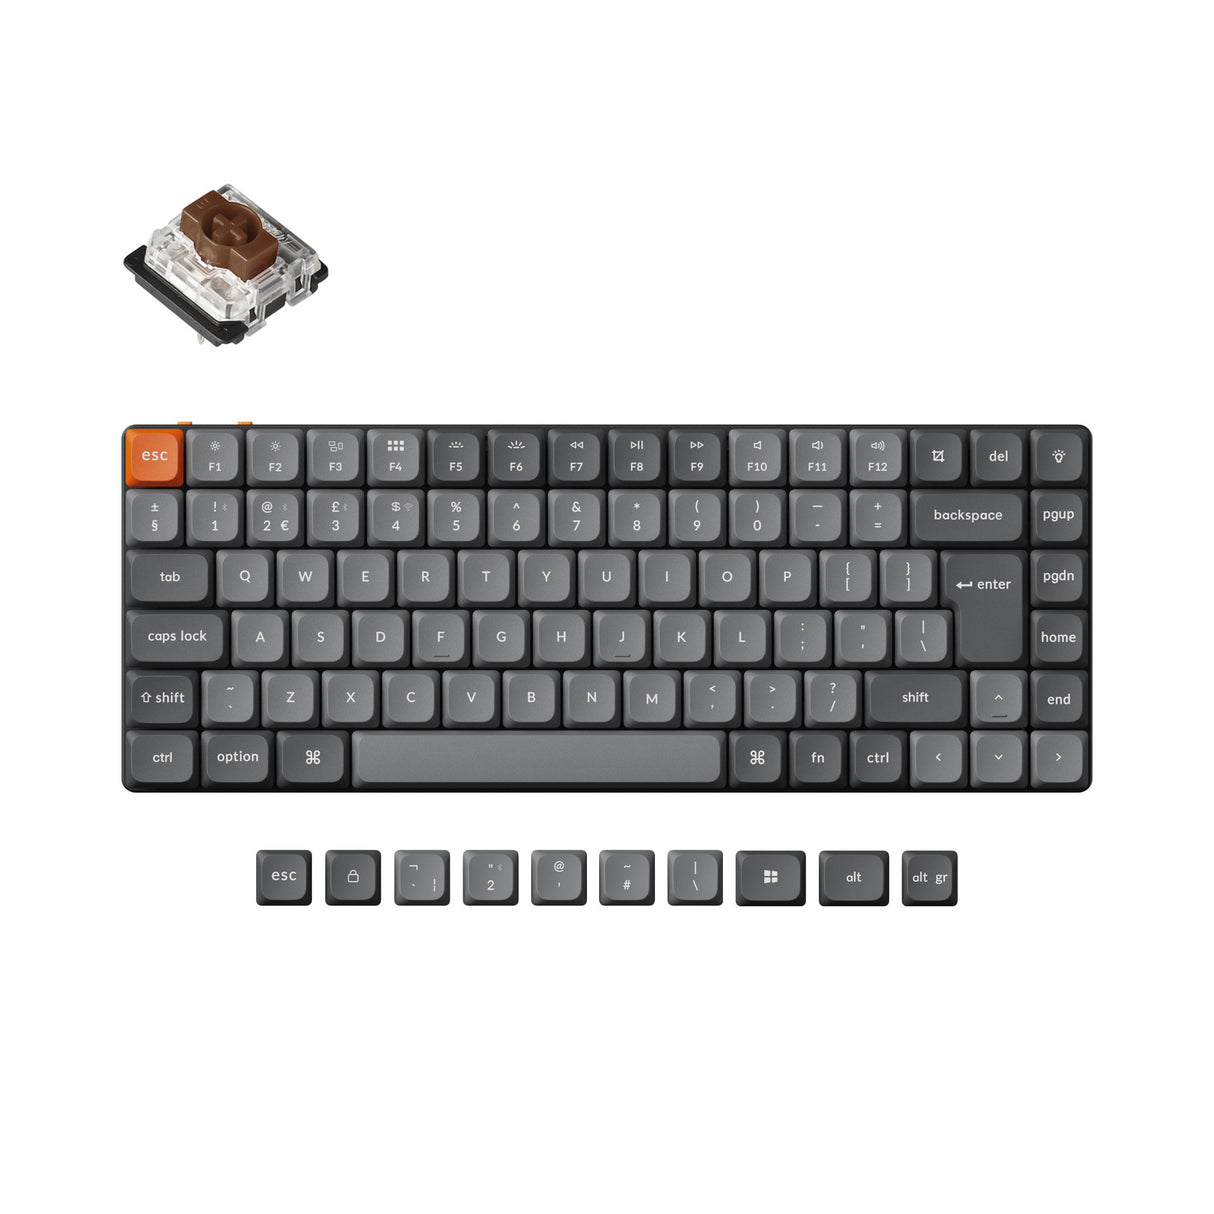 Keychron K3 Max QMK VIA ultra slim custom mechanical keyboard 75 percent layout PBT Keycaps hot-swappable Gateron low profile switch brown ISO UK layout